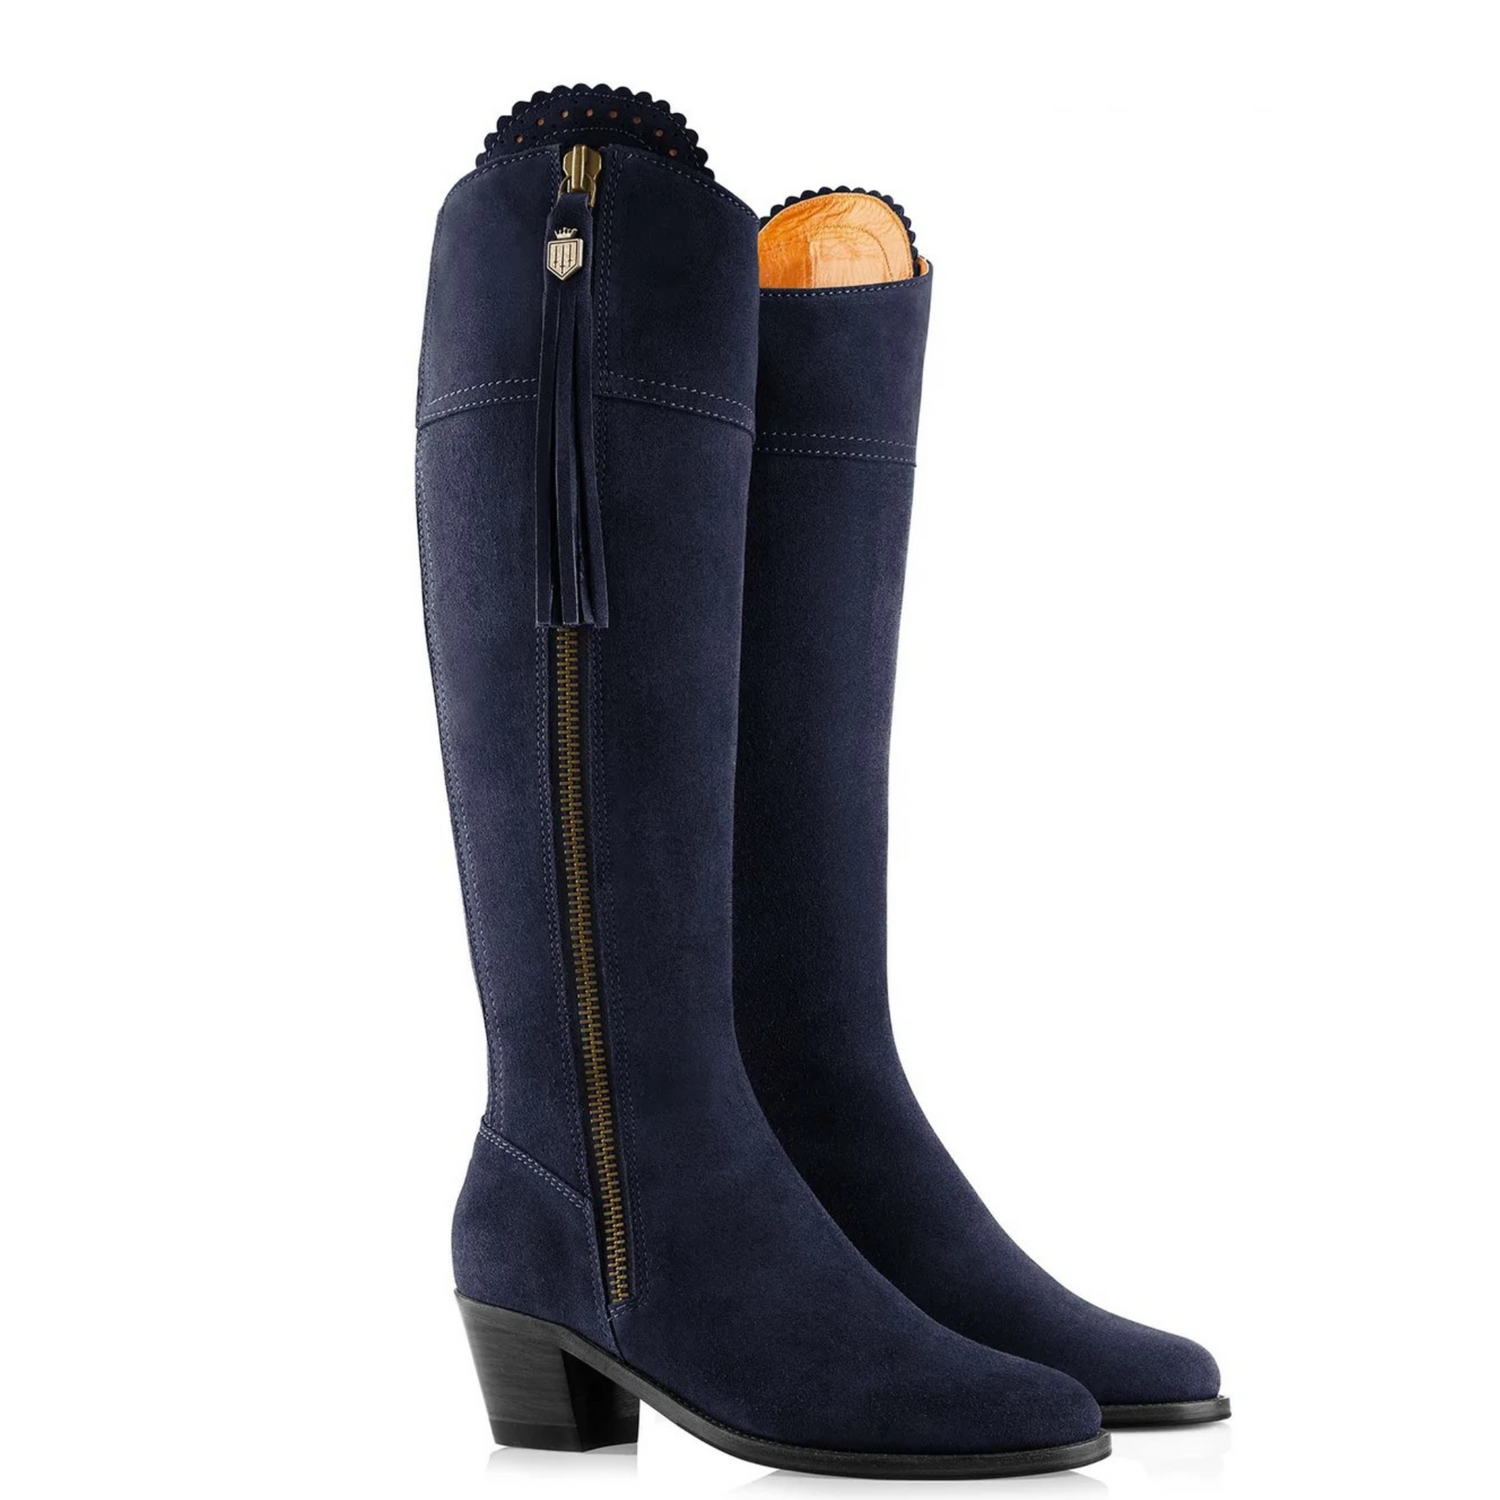 The Heeled Regina Sporting Fit Navy Suede